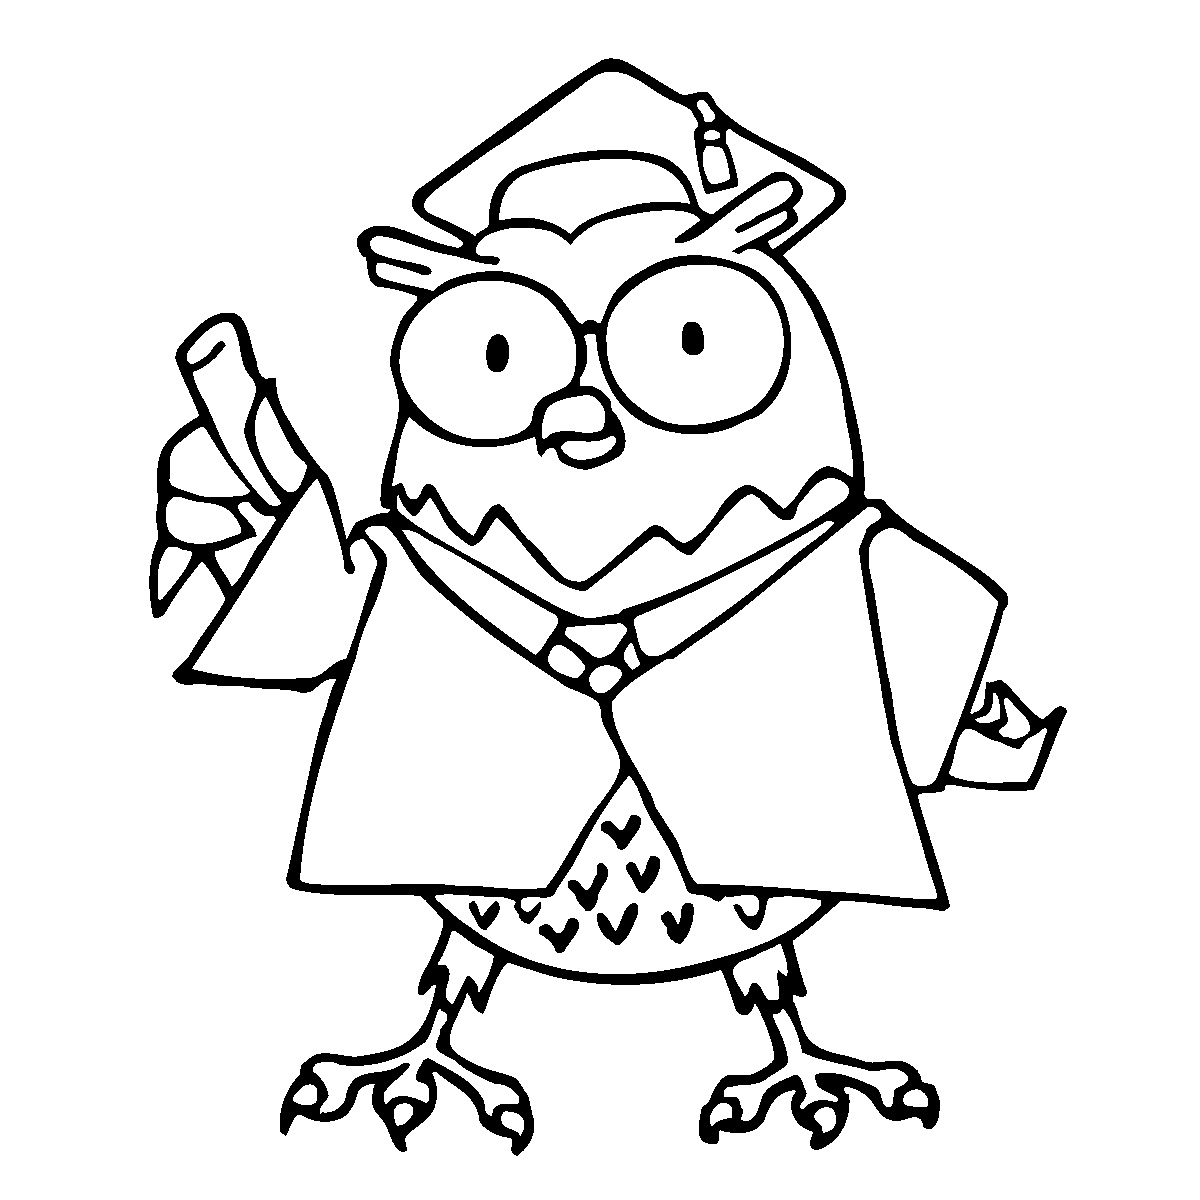 Owl Coloring Pages   Free Printable Pictures Coloring Pages For Kids